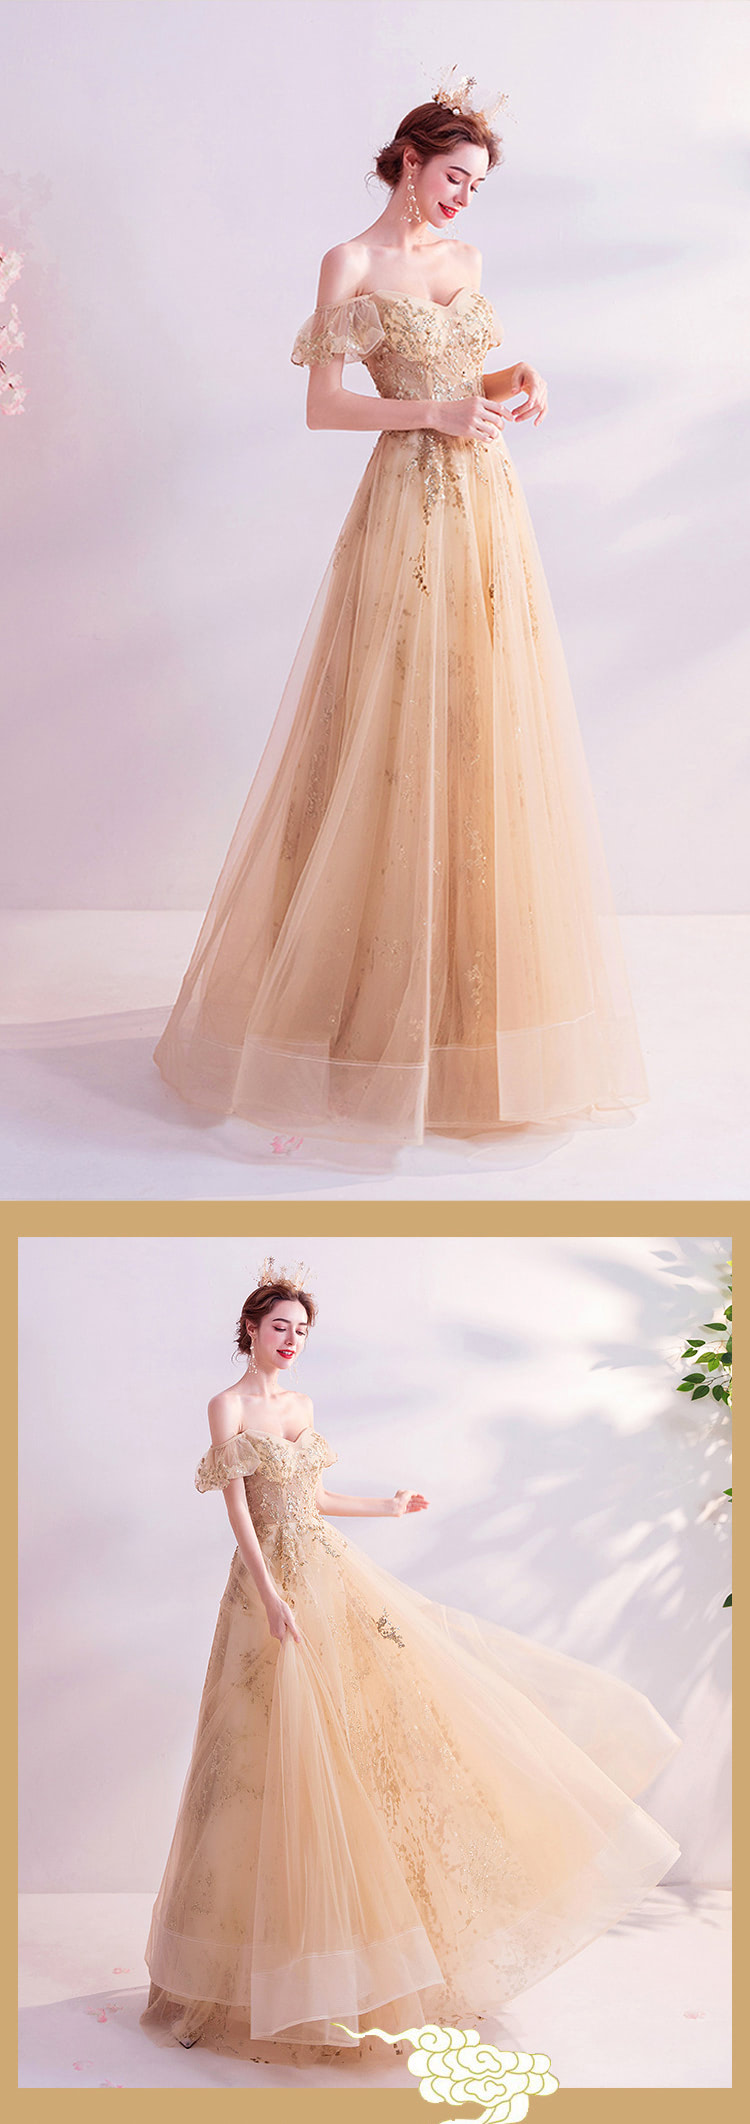 Off-Shoulder-Golden-Evening-Gown-Prom-Dress-for-Toast-Banquet-Party08